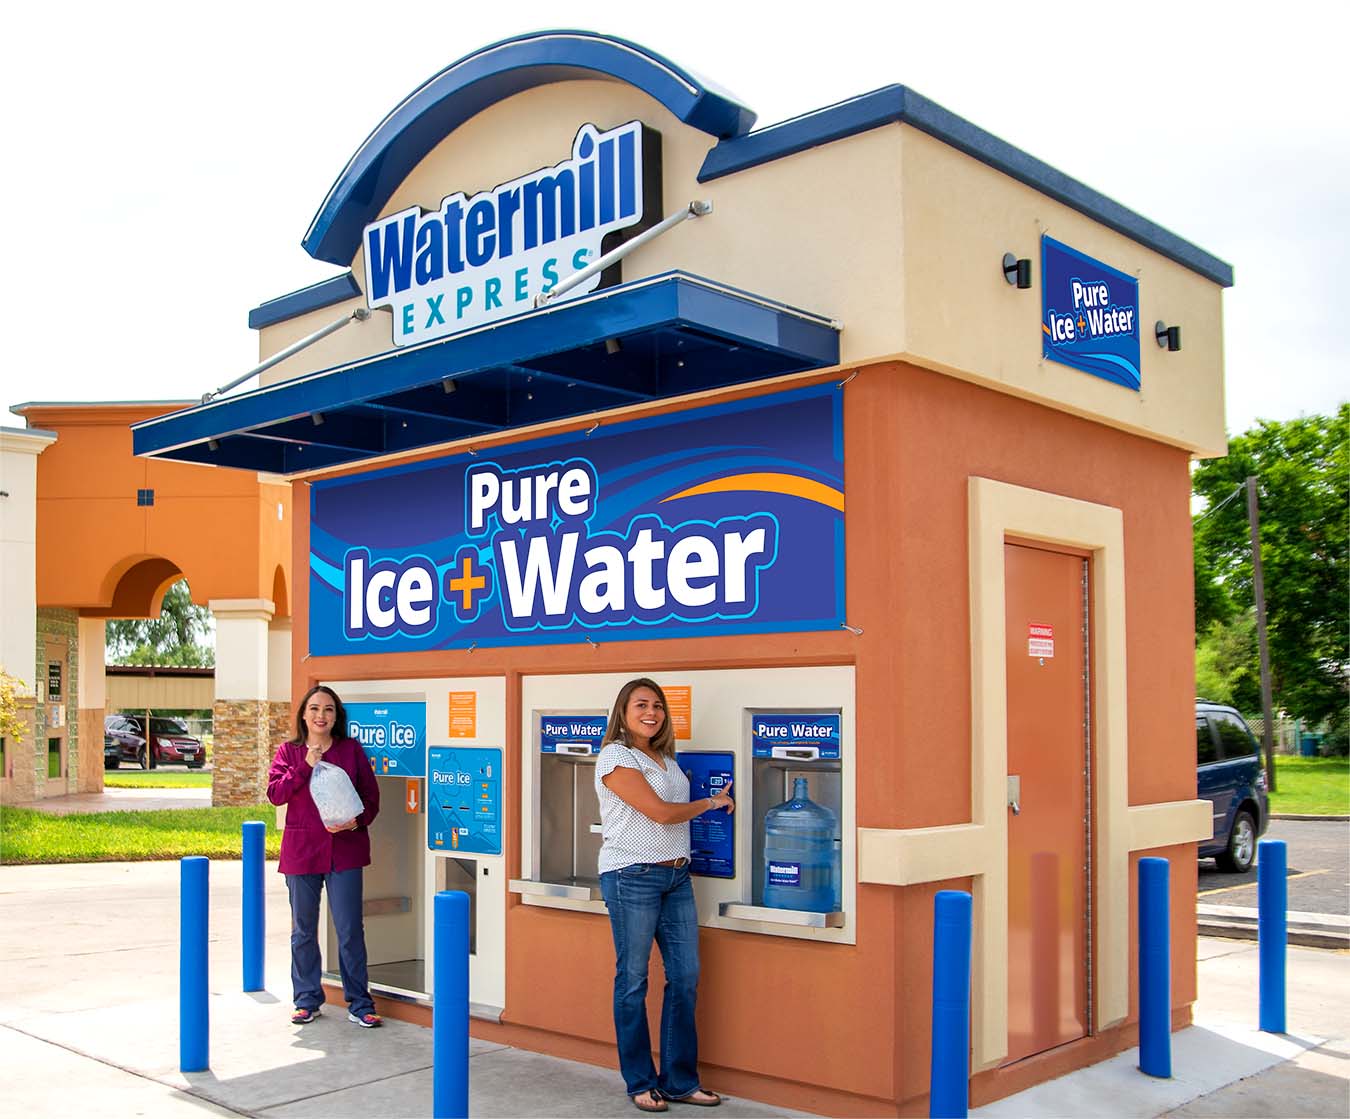 Water and ice refill kiosk